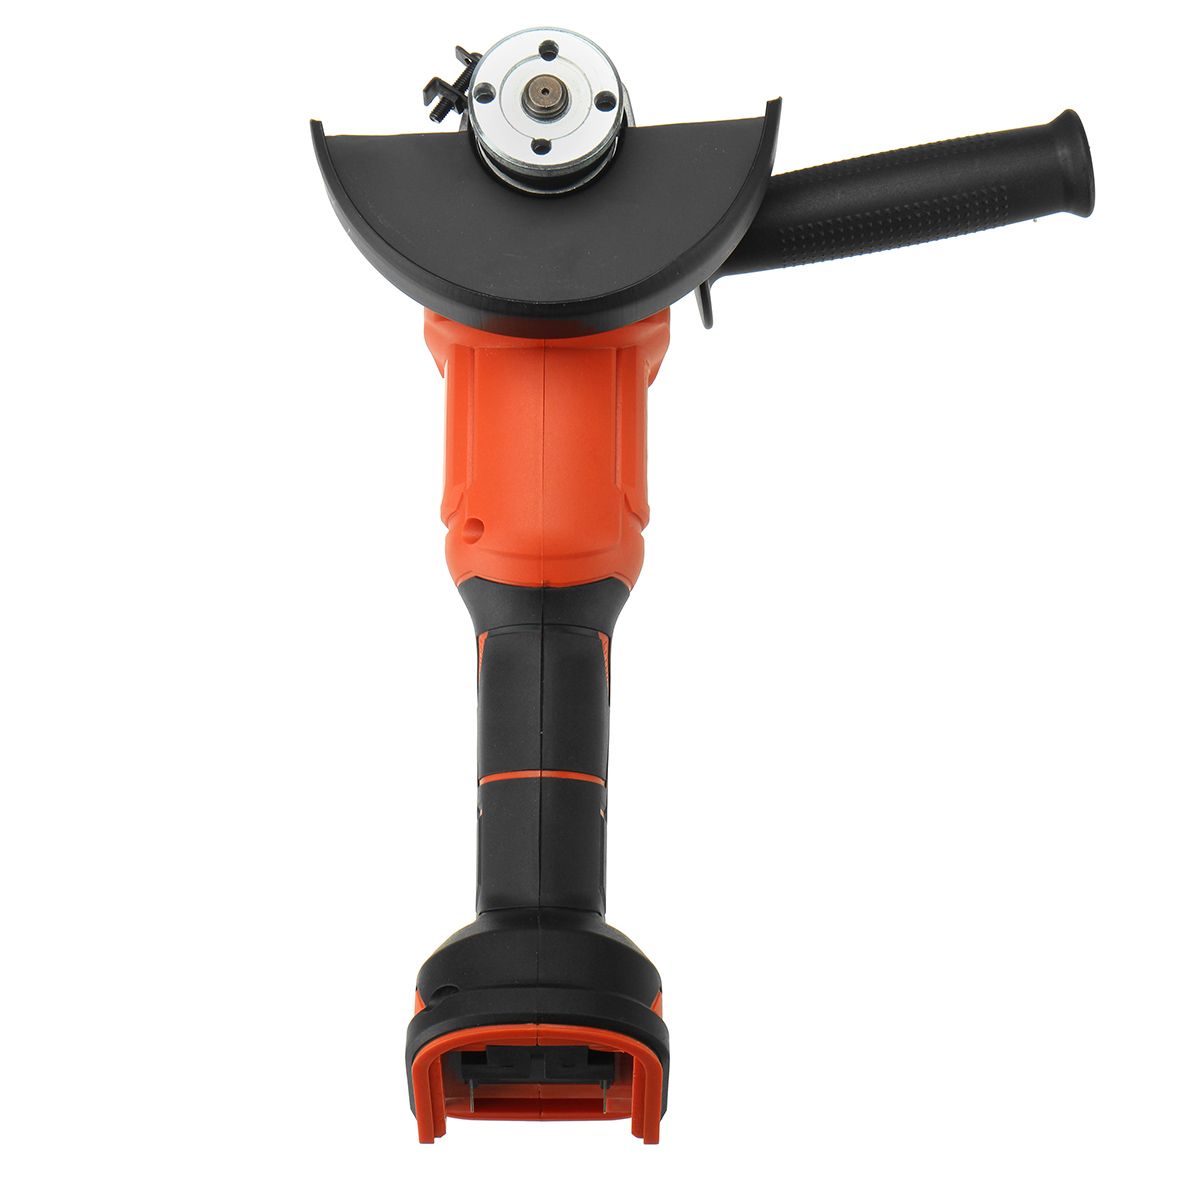 Brushless-Rechargeable-Angle-Grinder-Electric-Polisher-Multifunctional-Grinding-Cutting-Machine-For--1760079